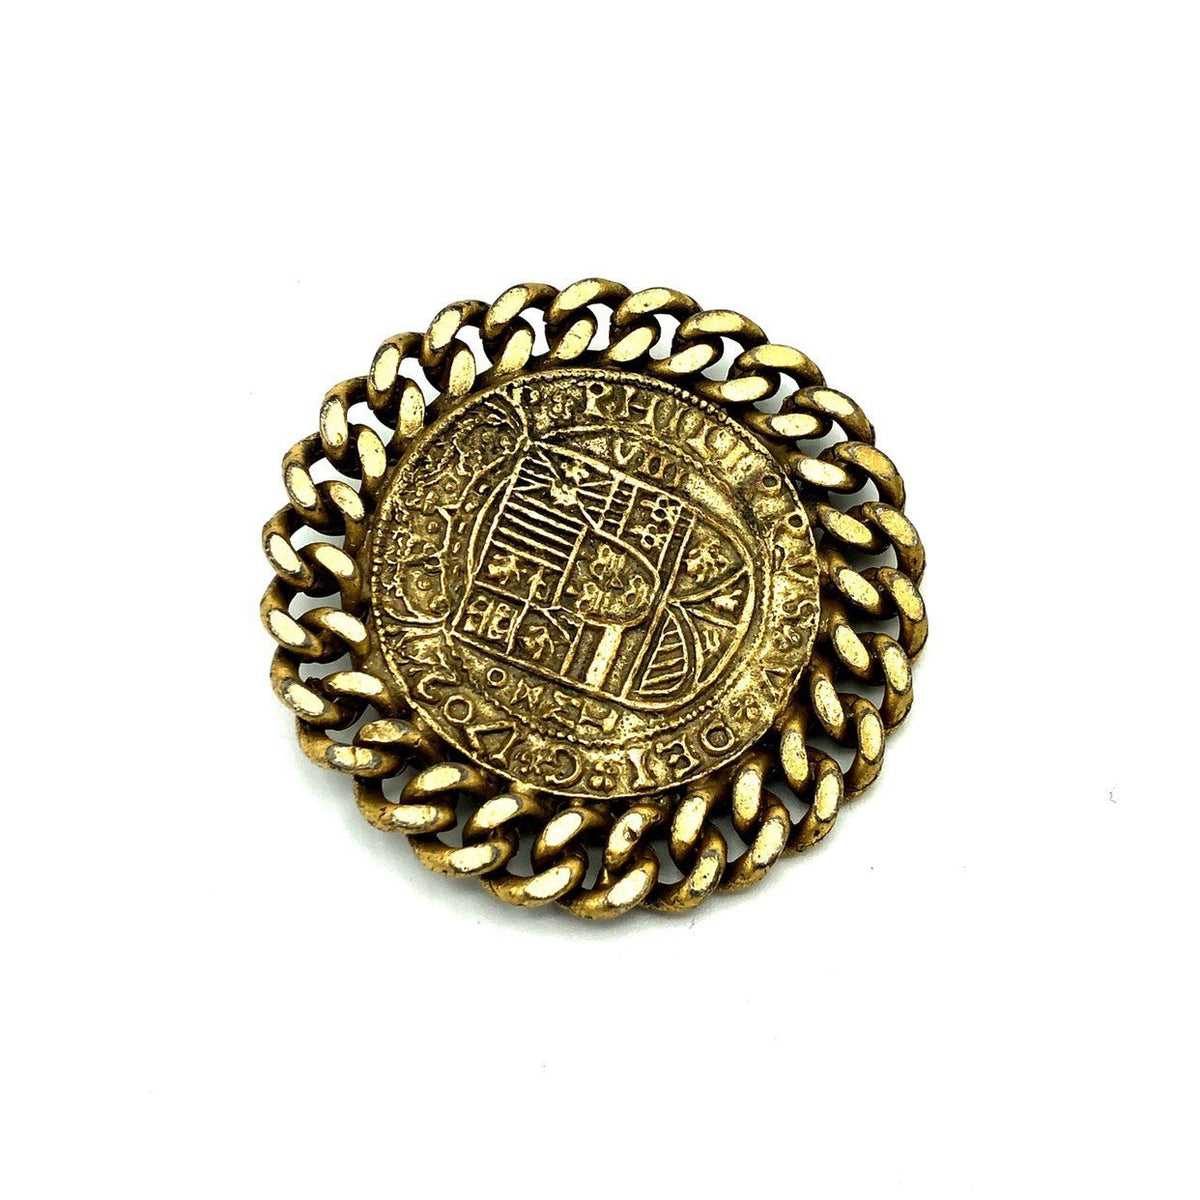 Hattie Carnegie Heraldic Coat of Arms Ancient Coin Brooch - 24 Wishes Vintage Jewelry